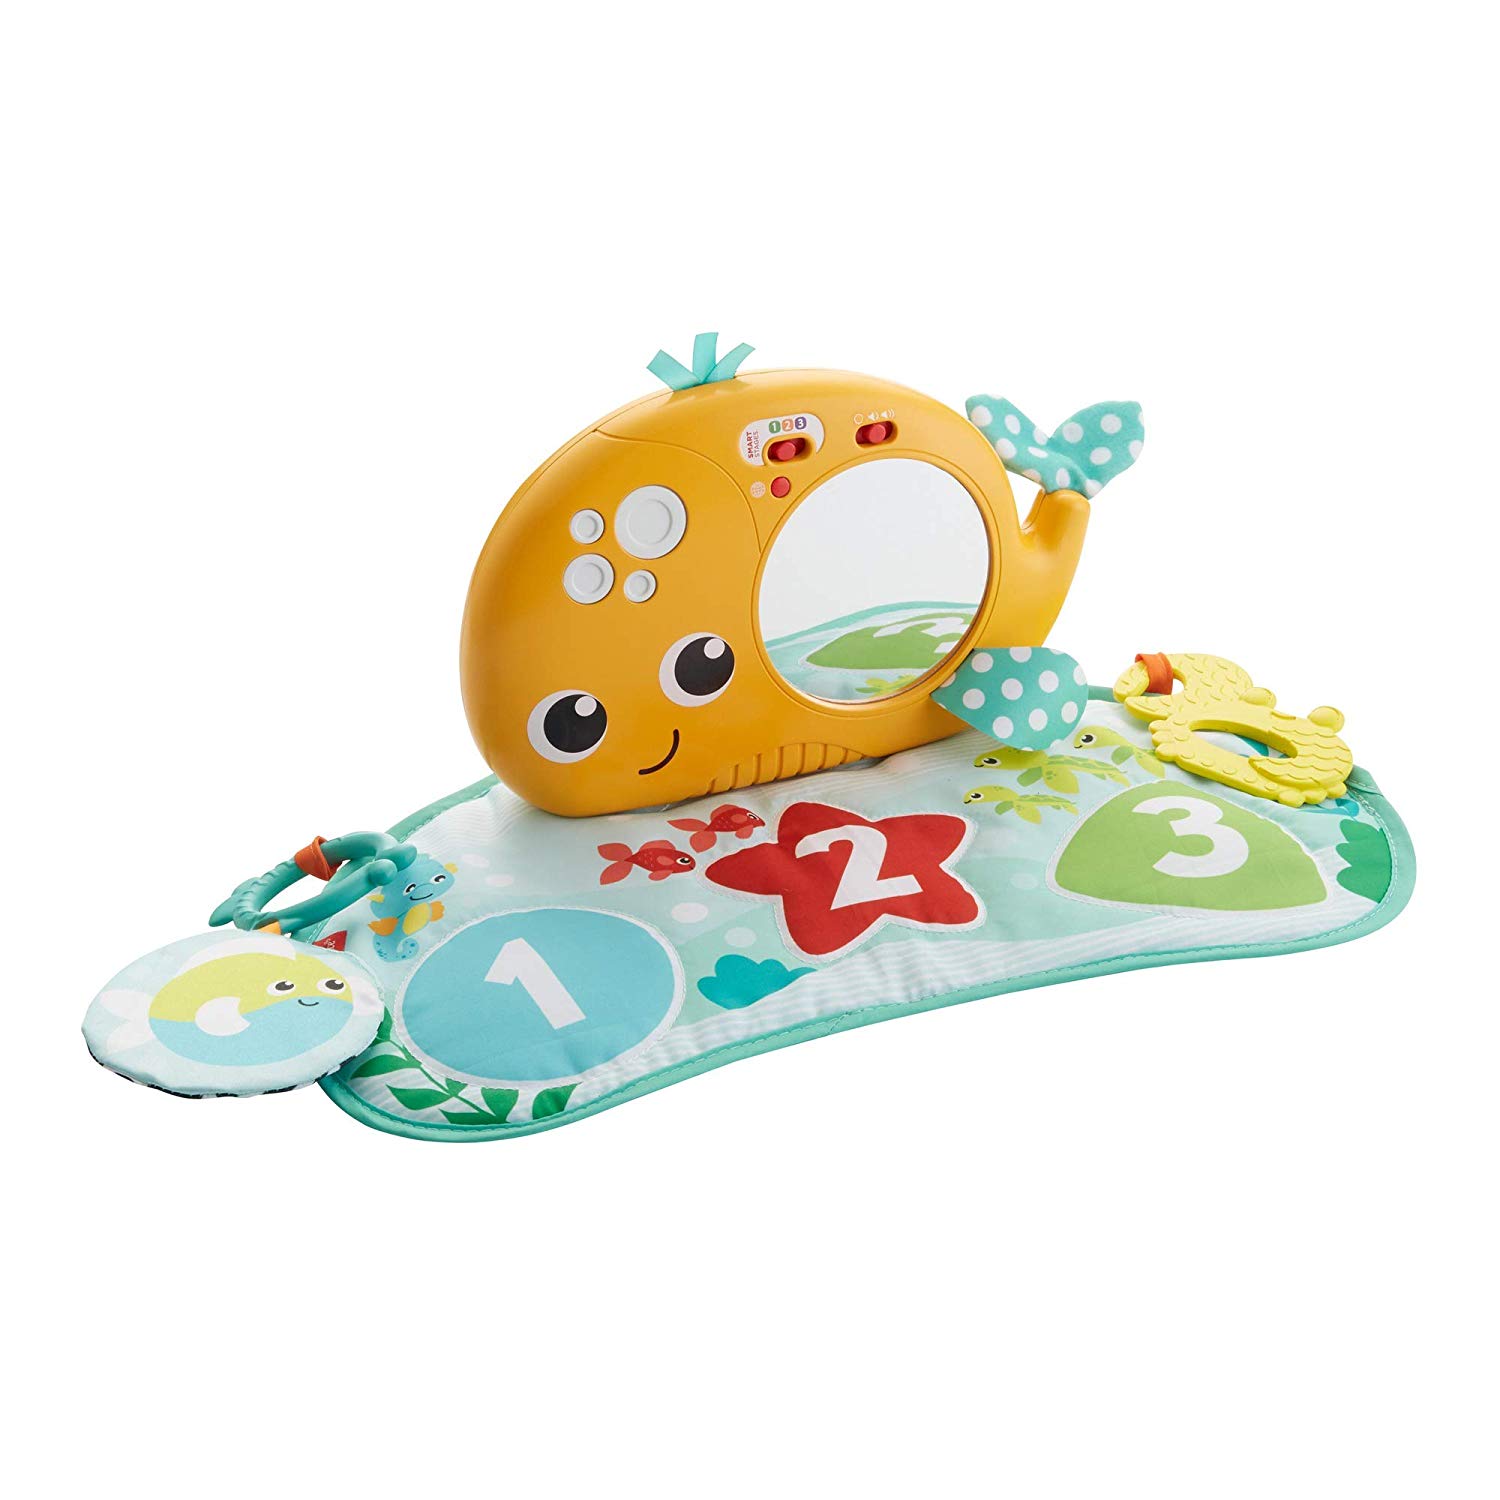 Fisher-Price Ggk34 Toy - Multicolour